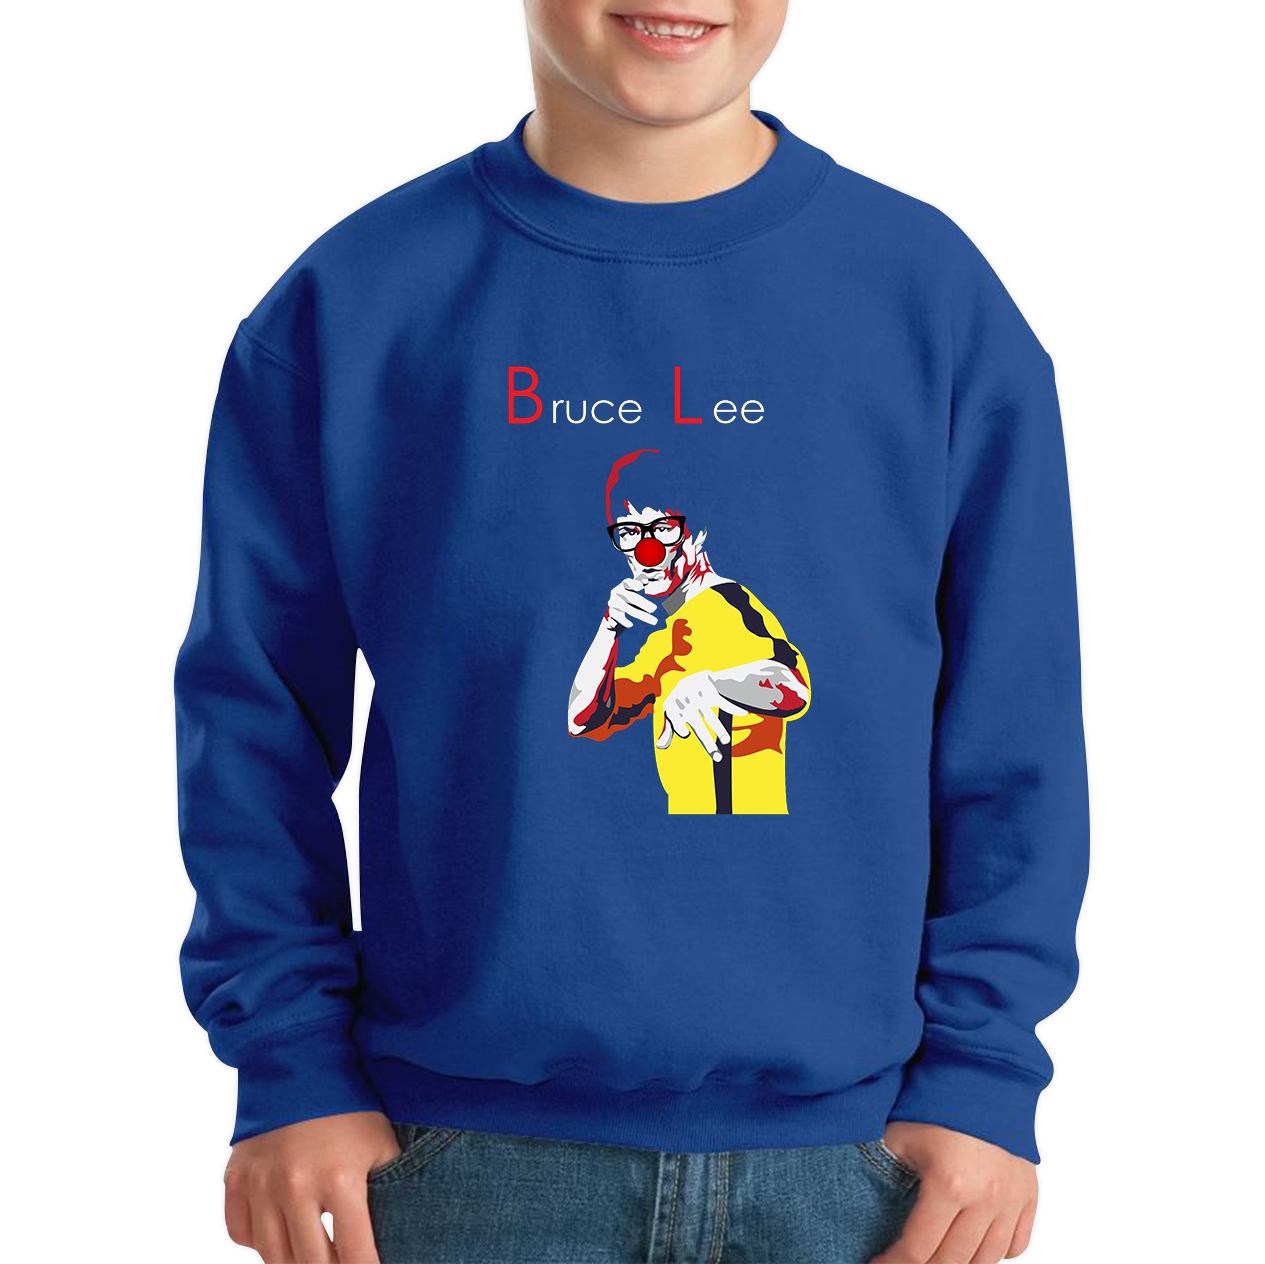 Bruce Lee Red Nose Day Kids Sweatshirt. 50% Goes To Charity